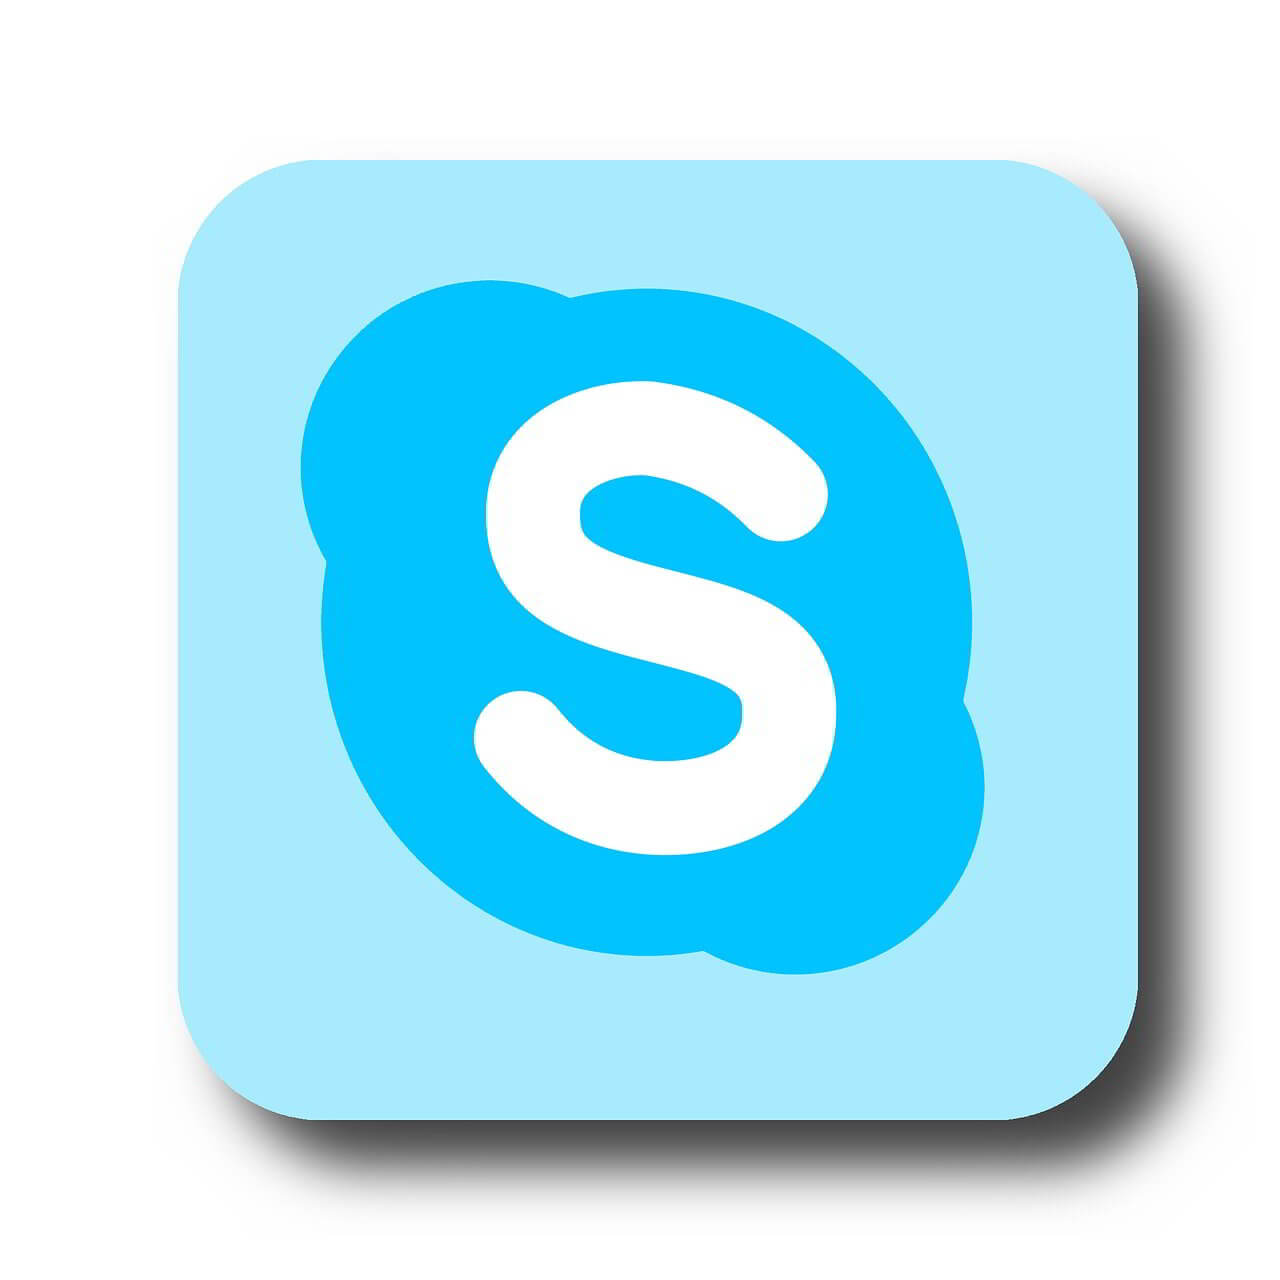 old version of skype for mac not working